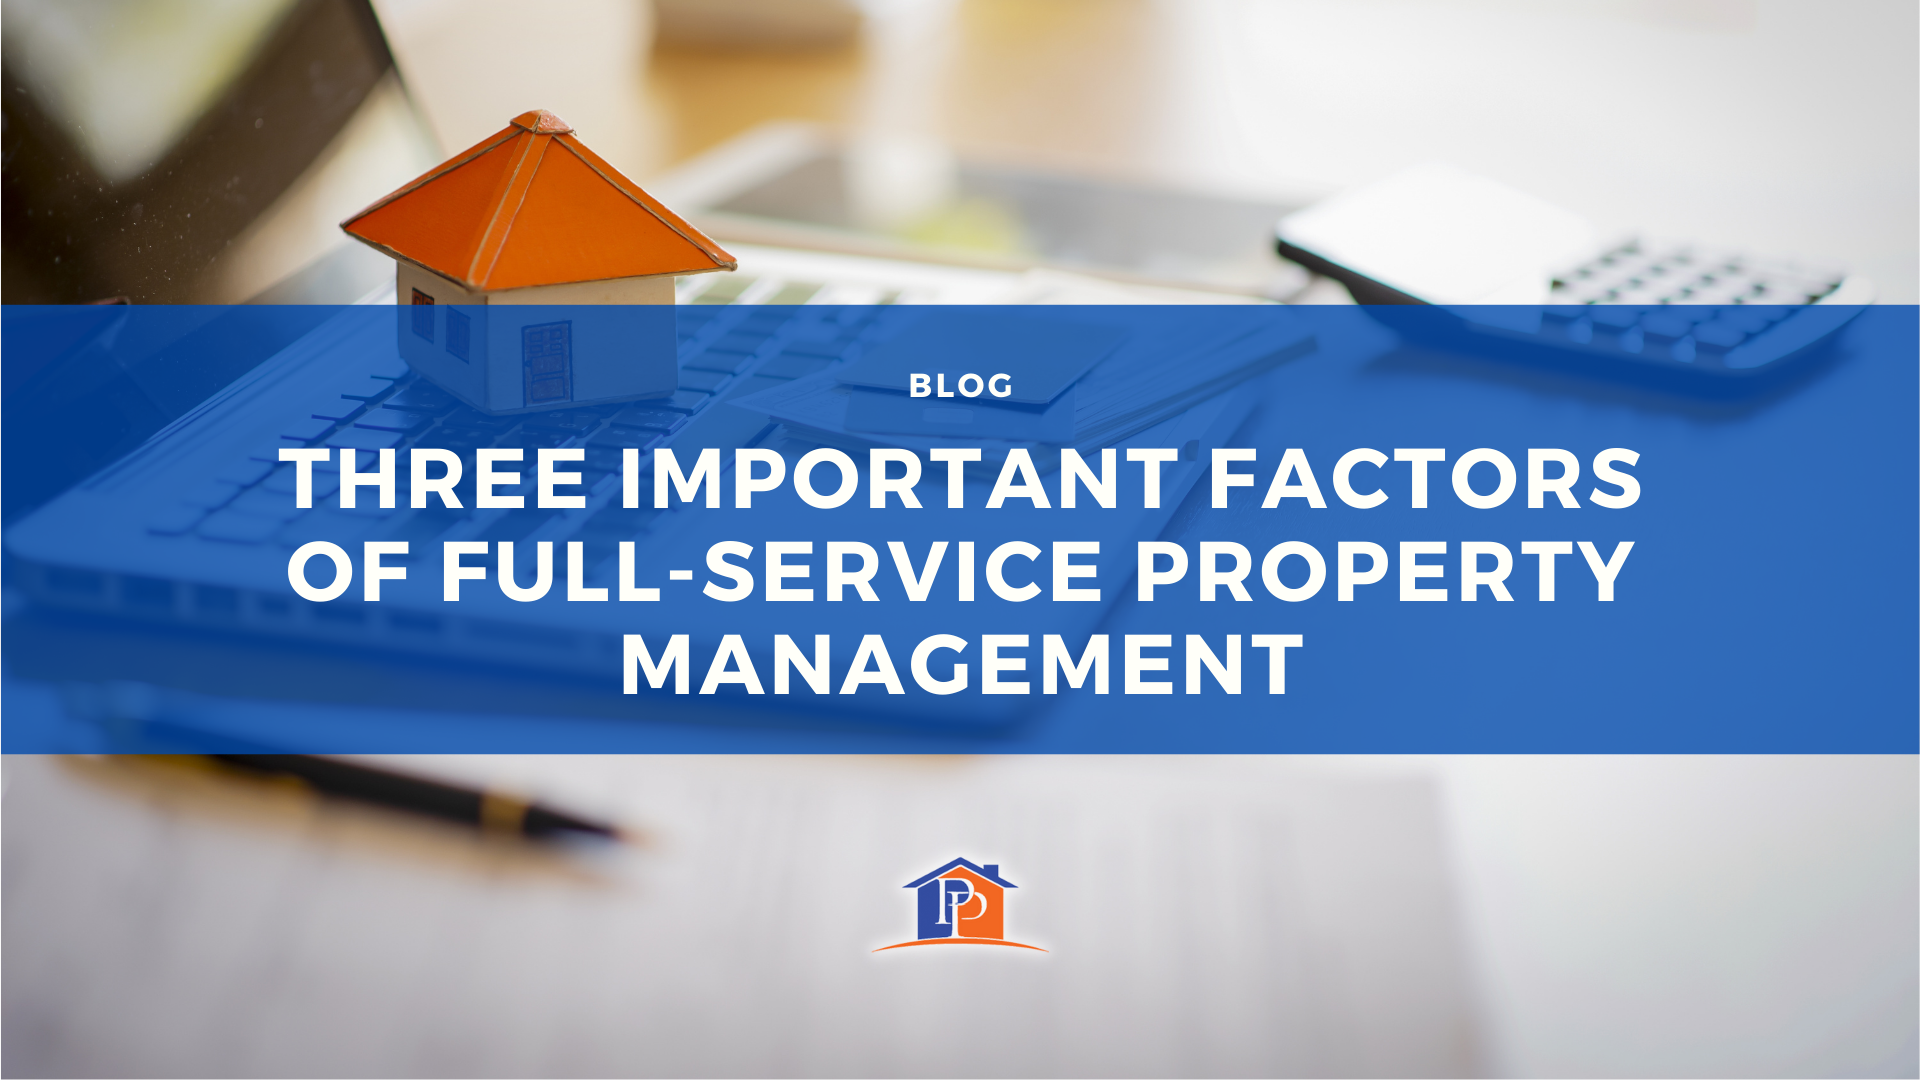 Three Important Factors of Full-Service Property Management